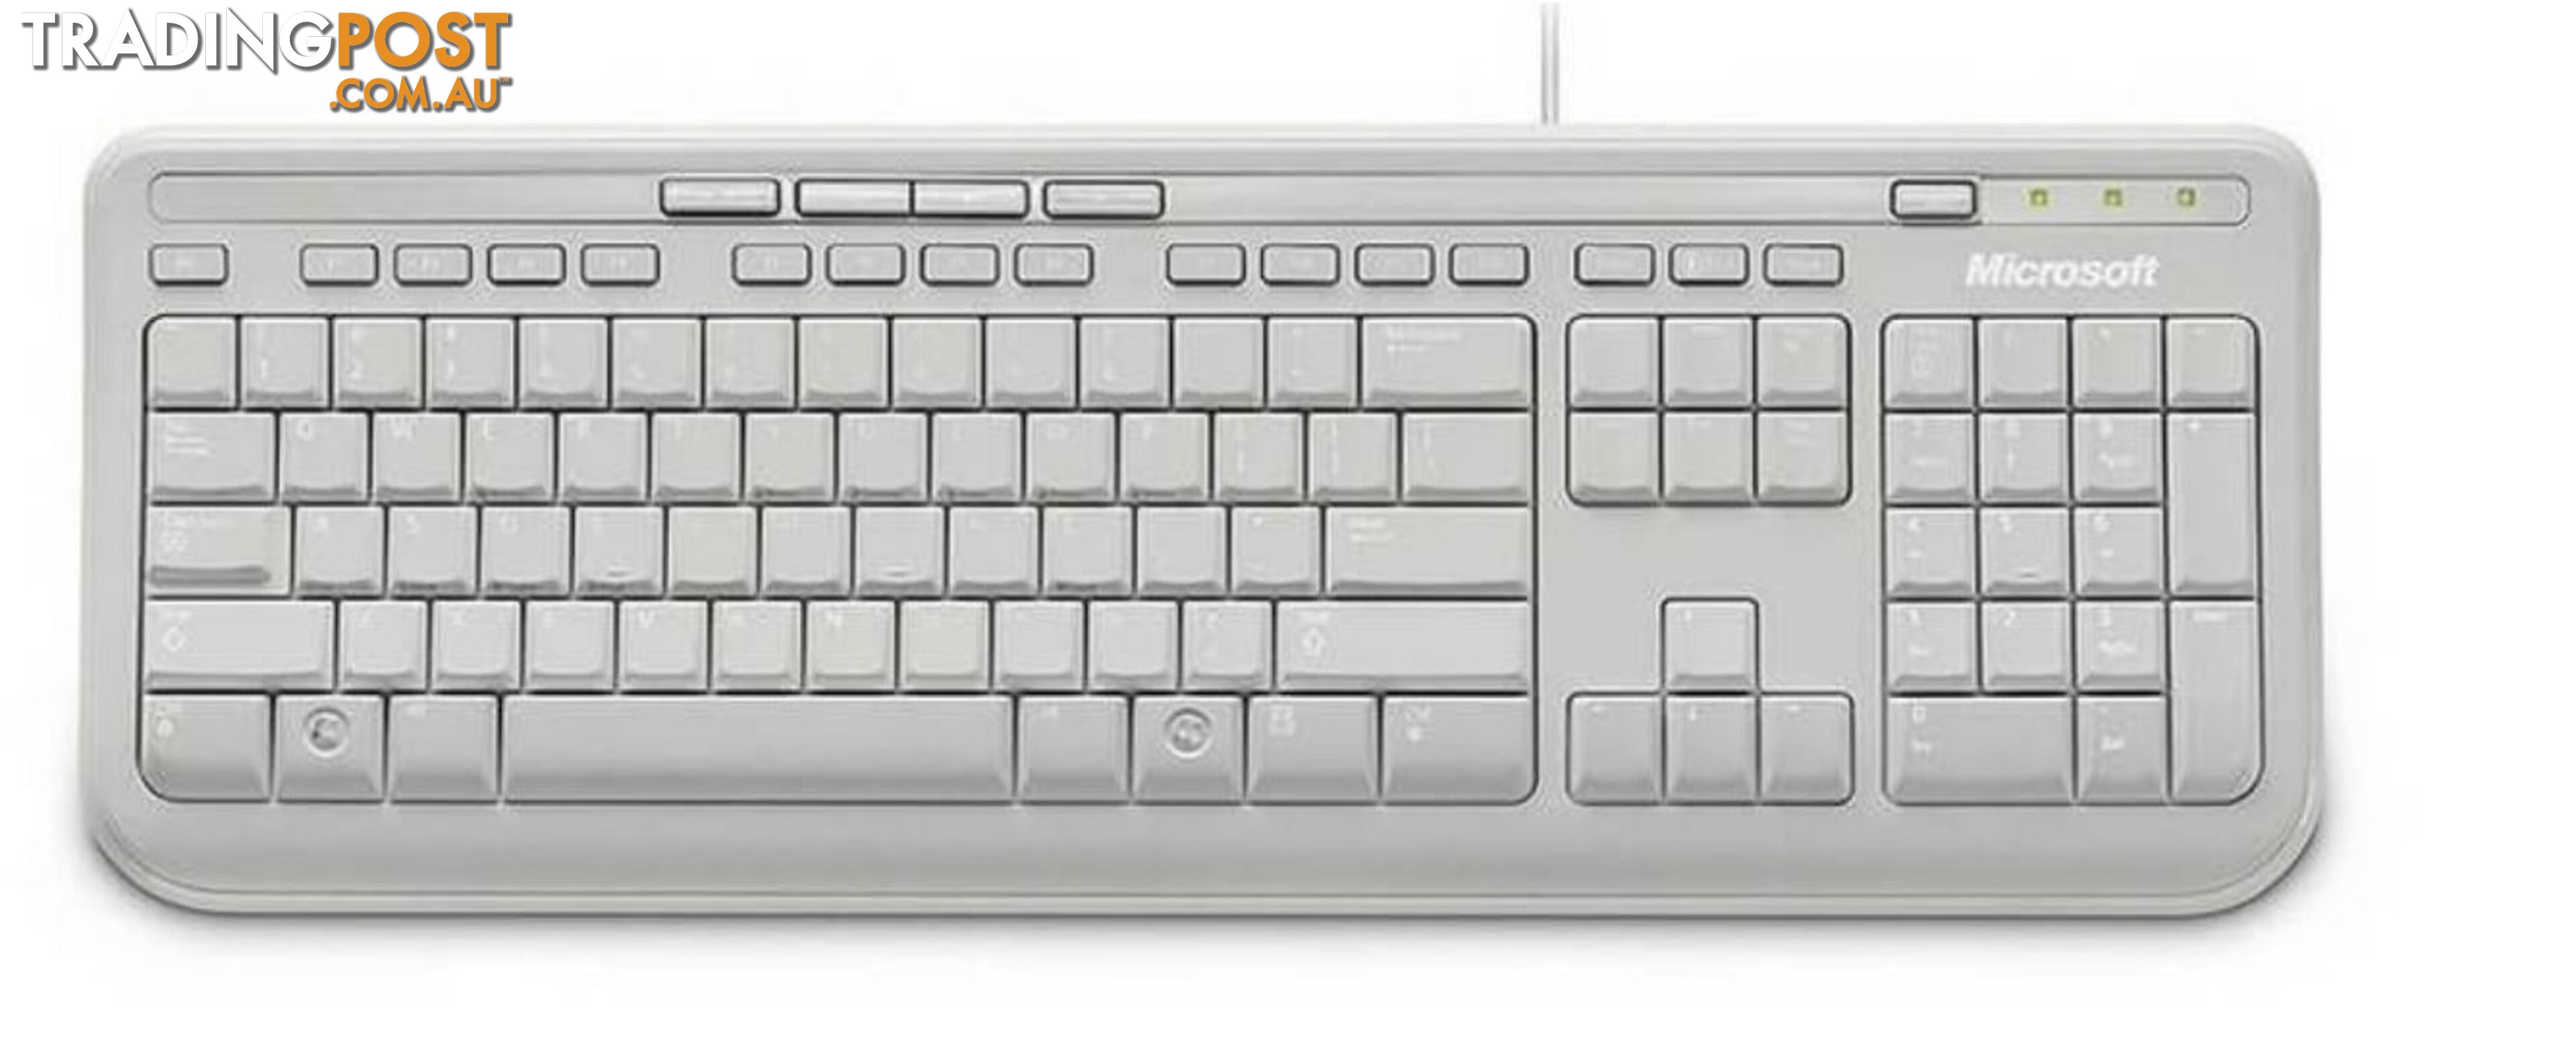 Microsoft Wired 600 Keyboard Only USB, 3 Year, ANB-00034 Retail Pack, White - KBMSWKB600WH